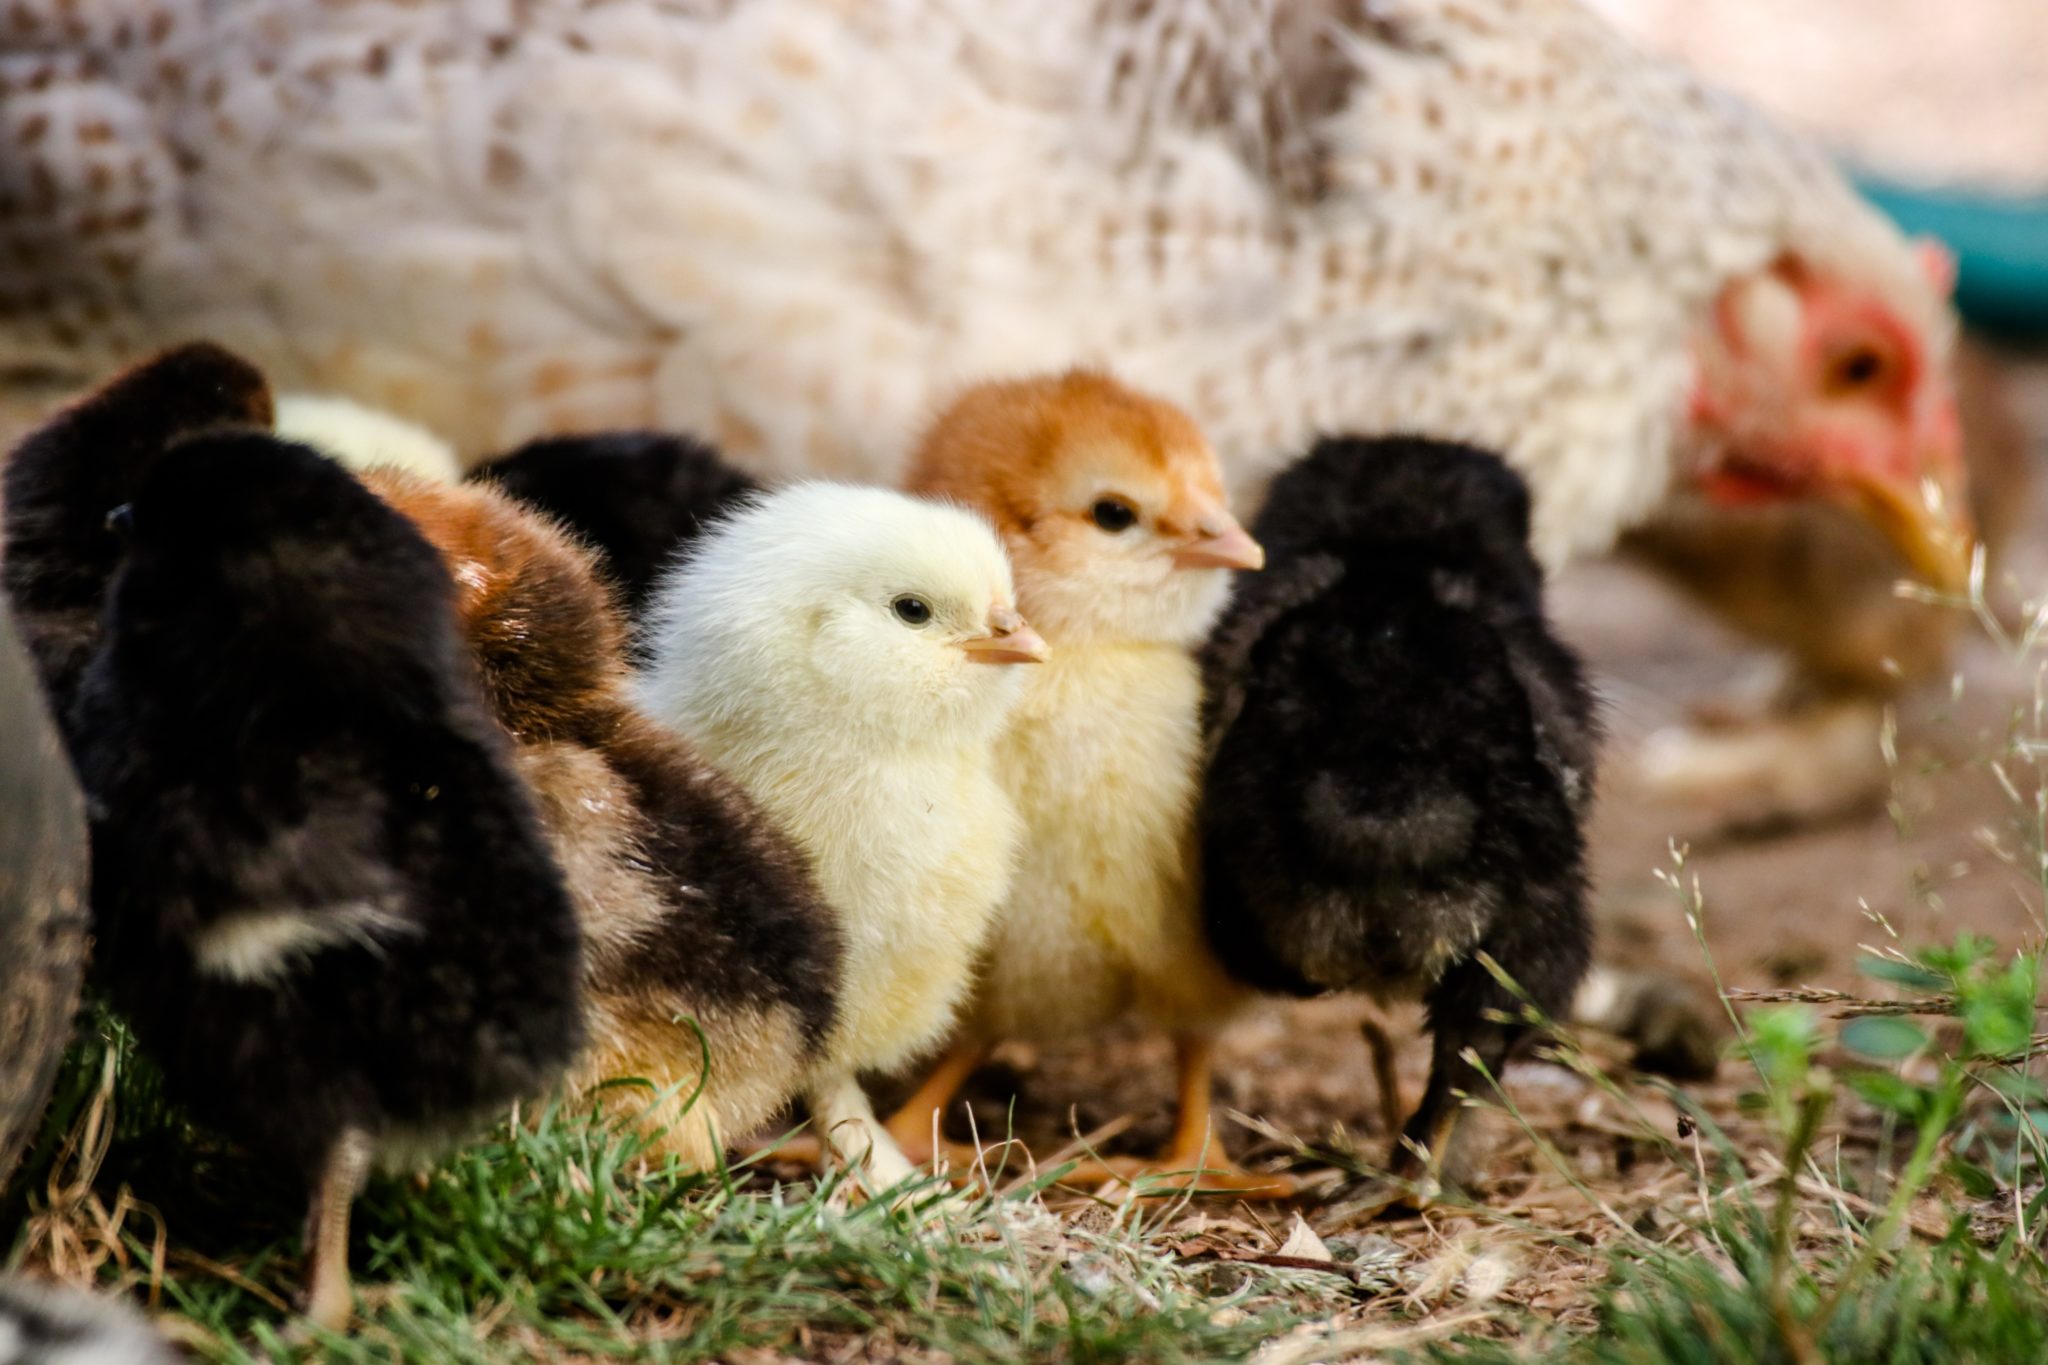 photo showing a variety of chick breeds and adult hen in background